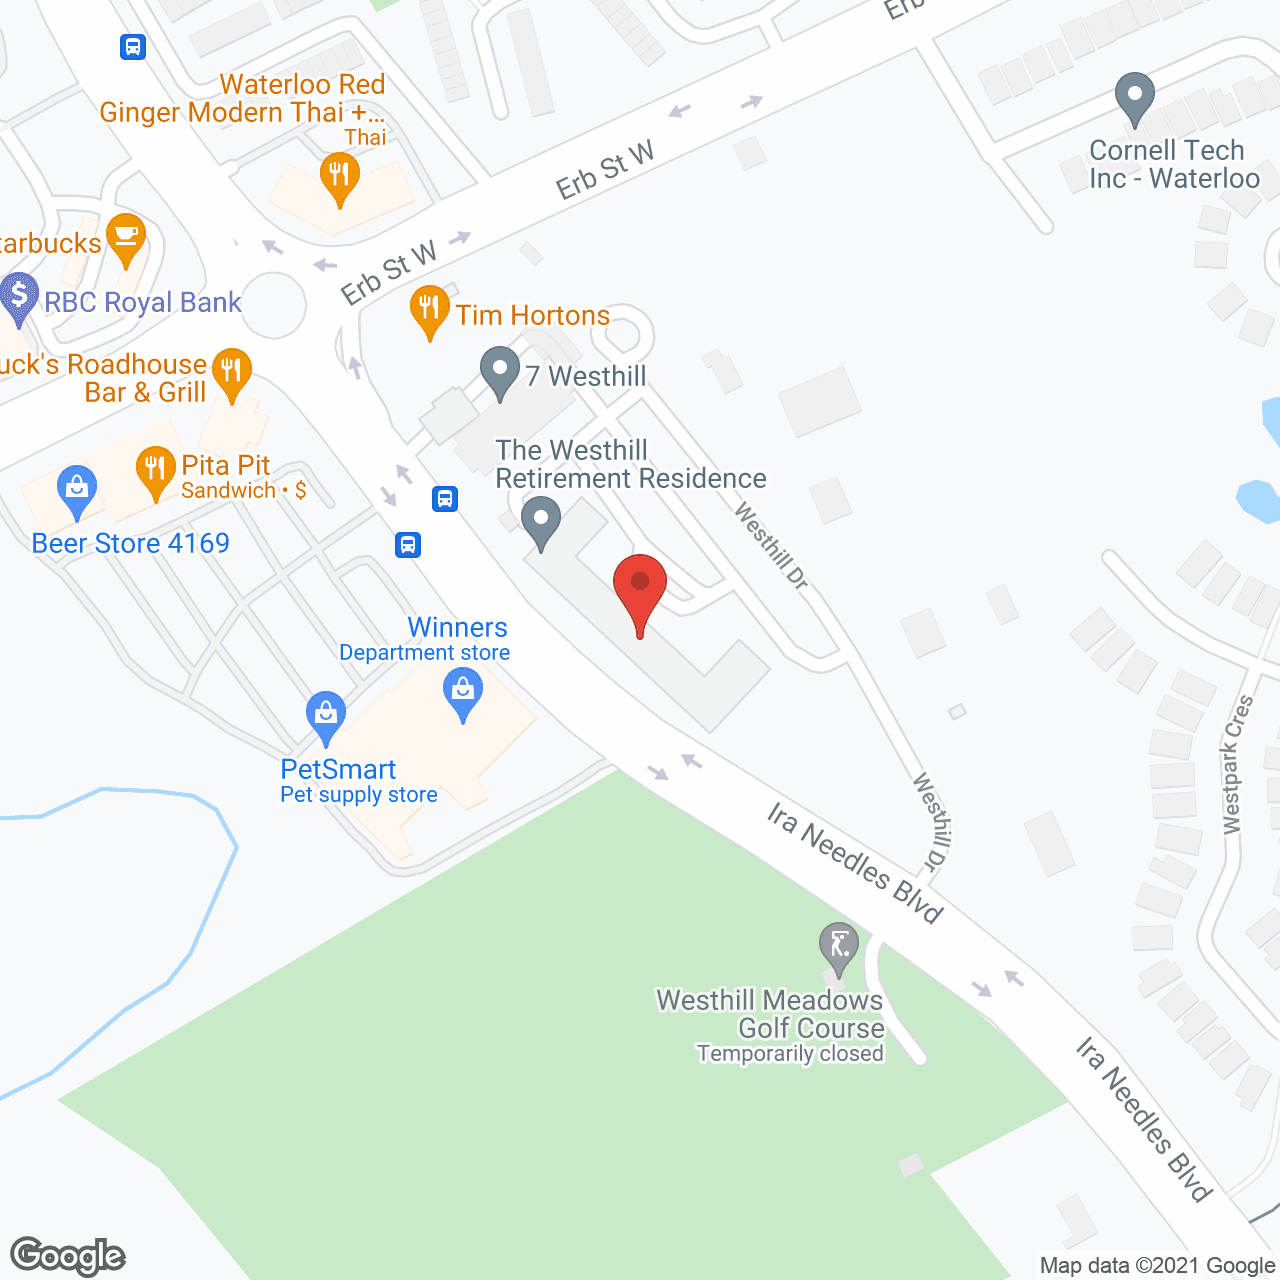 The Westhill in google map